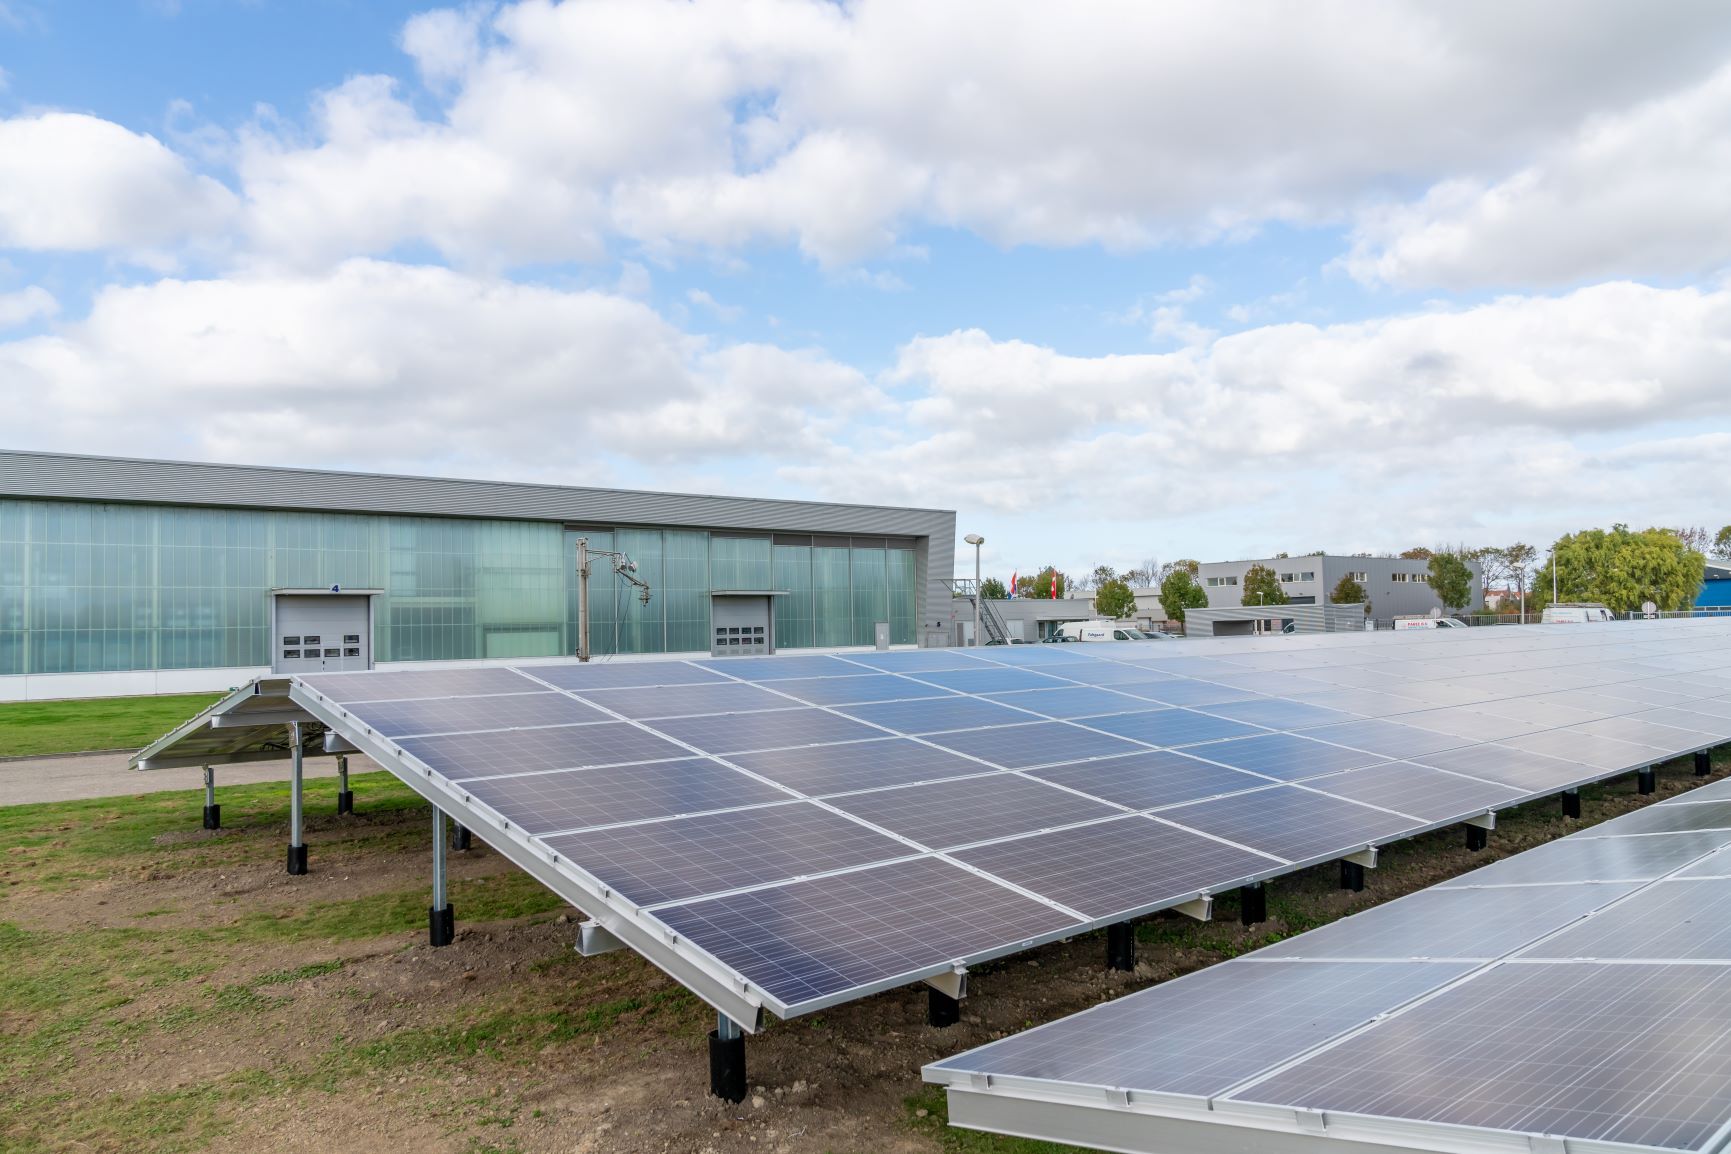 Palsgaard has installed 840 solar panels at its Dutch production facility